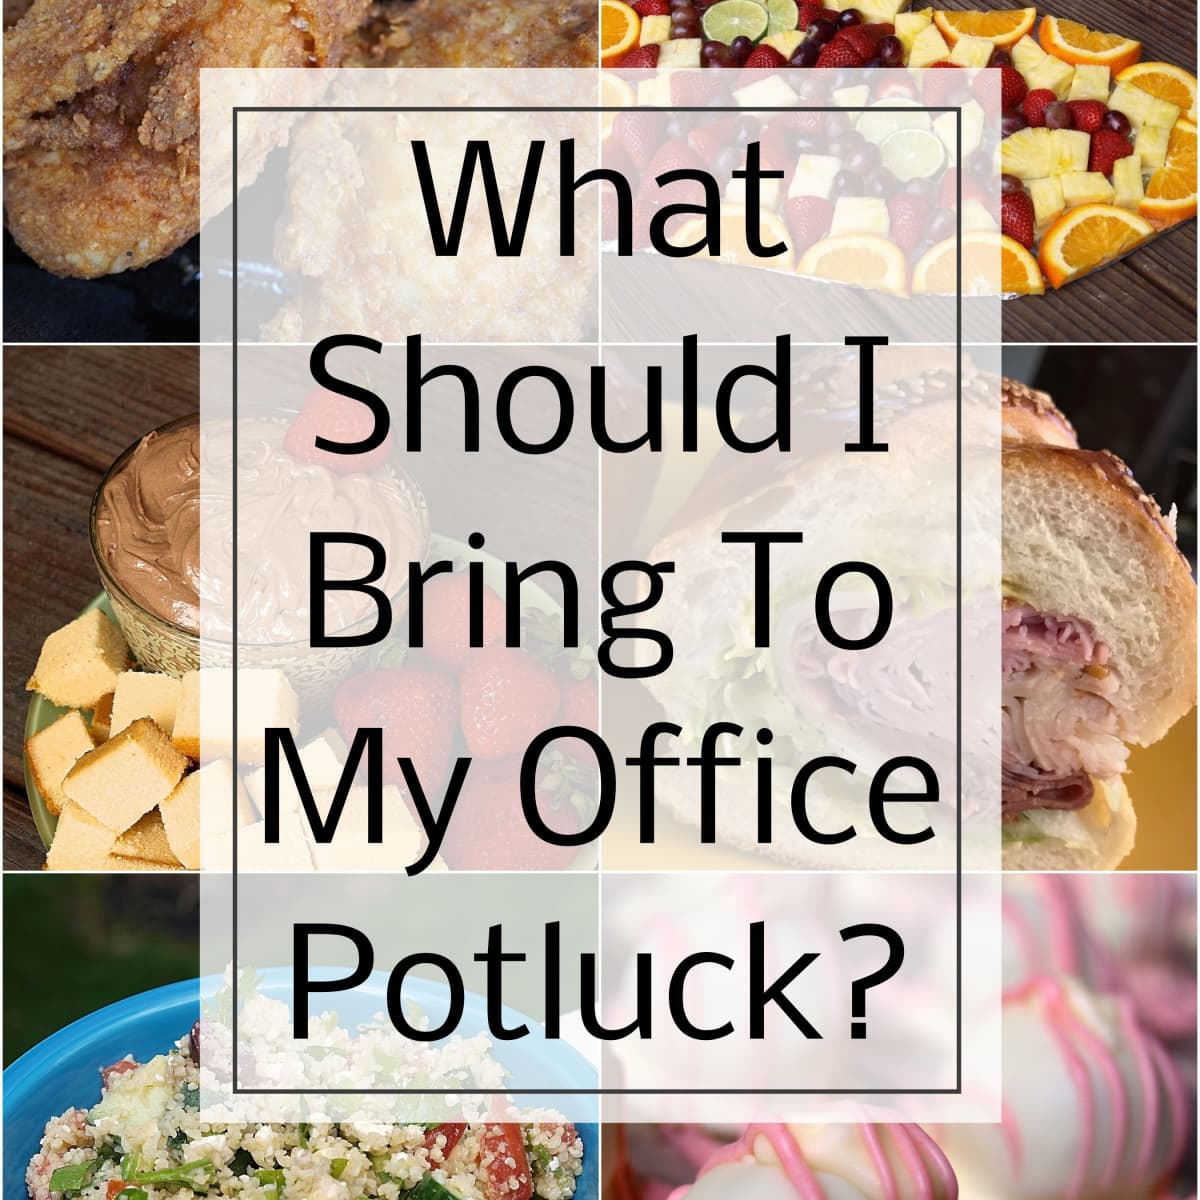 What Are the Best Dishes to Bring to an Office Potluck? - Delishably